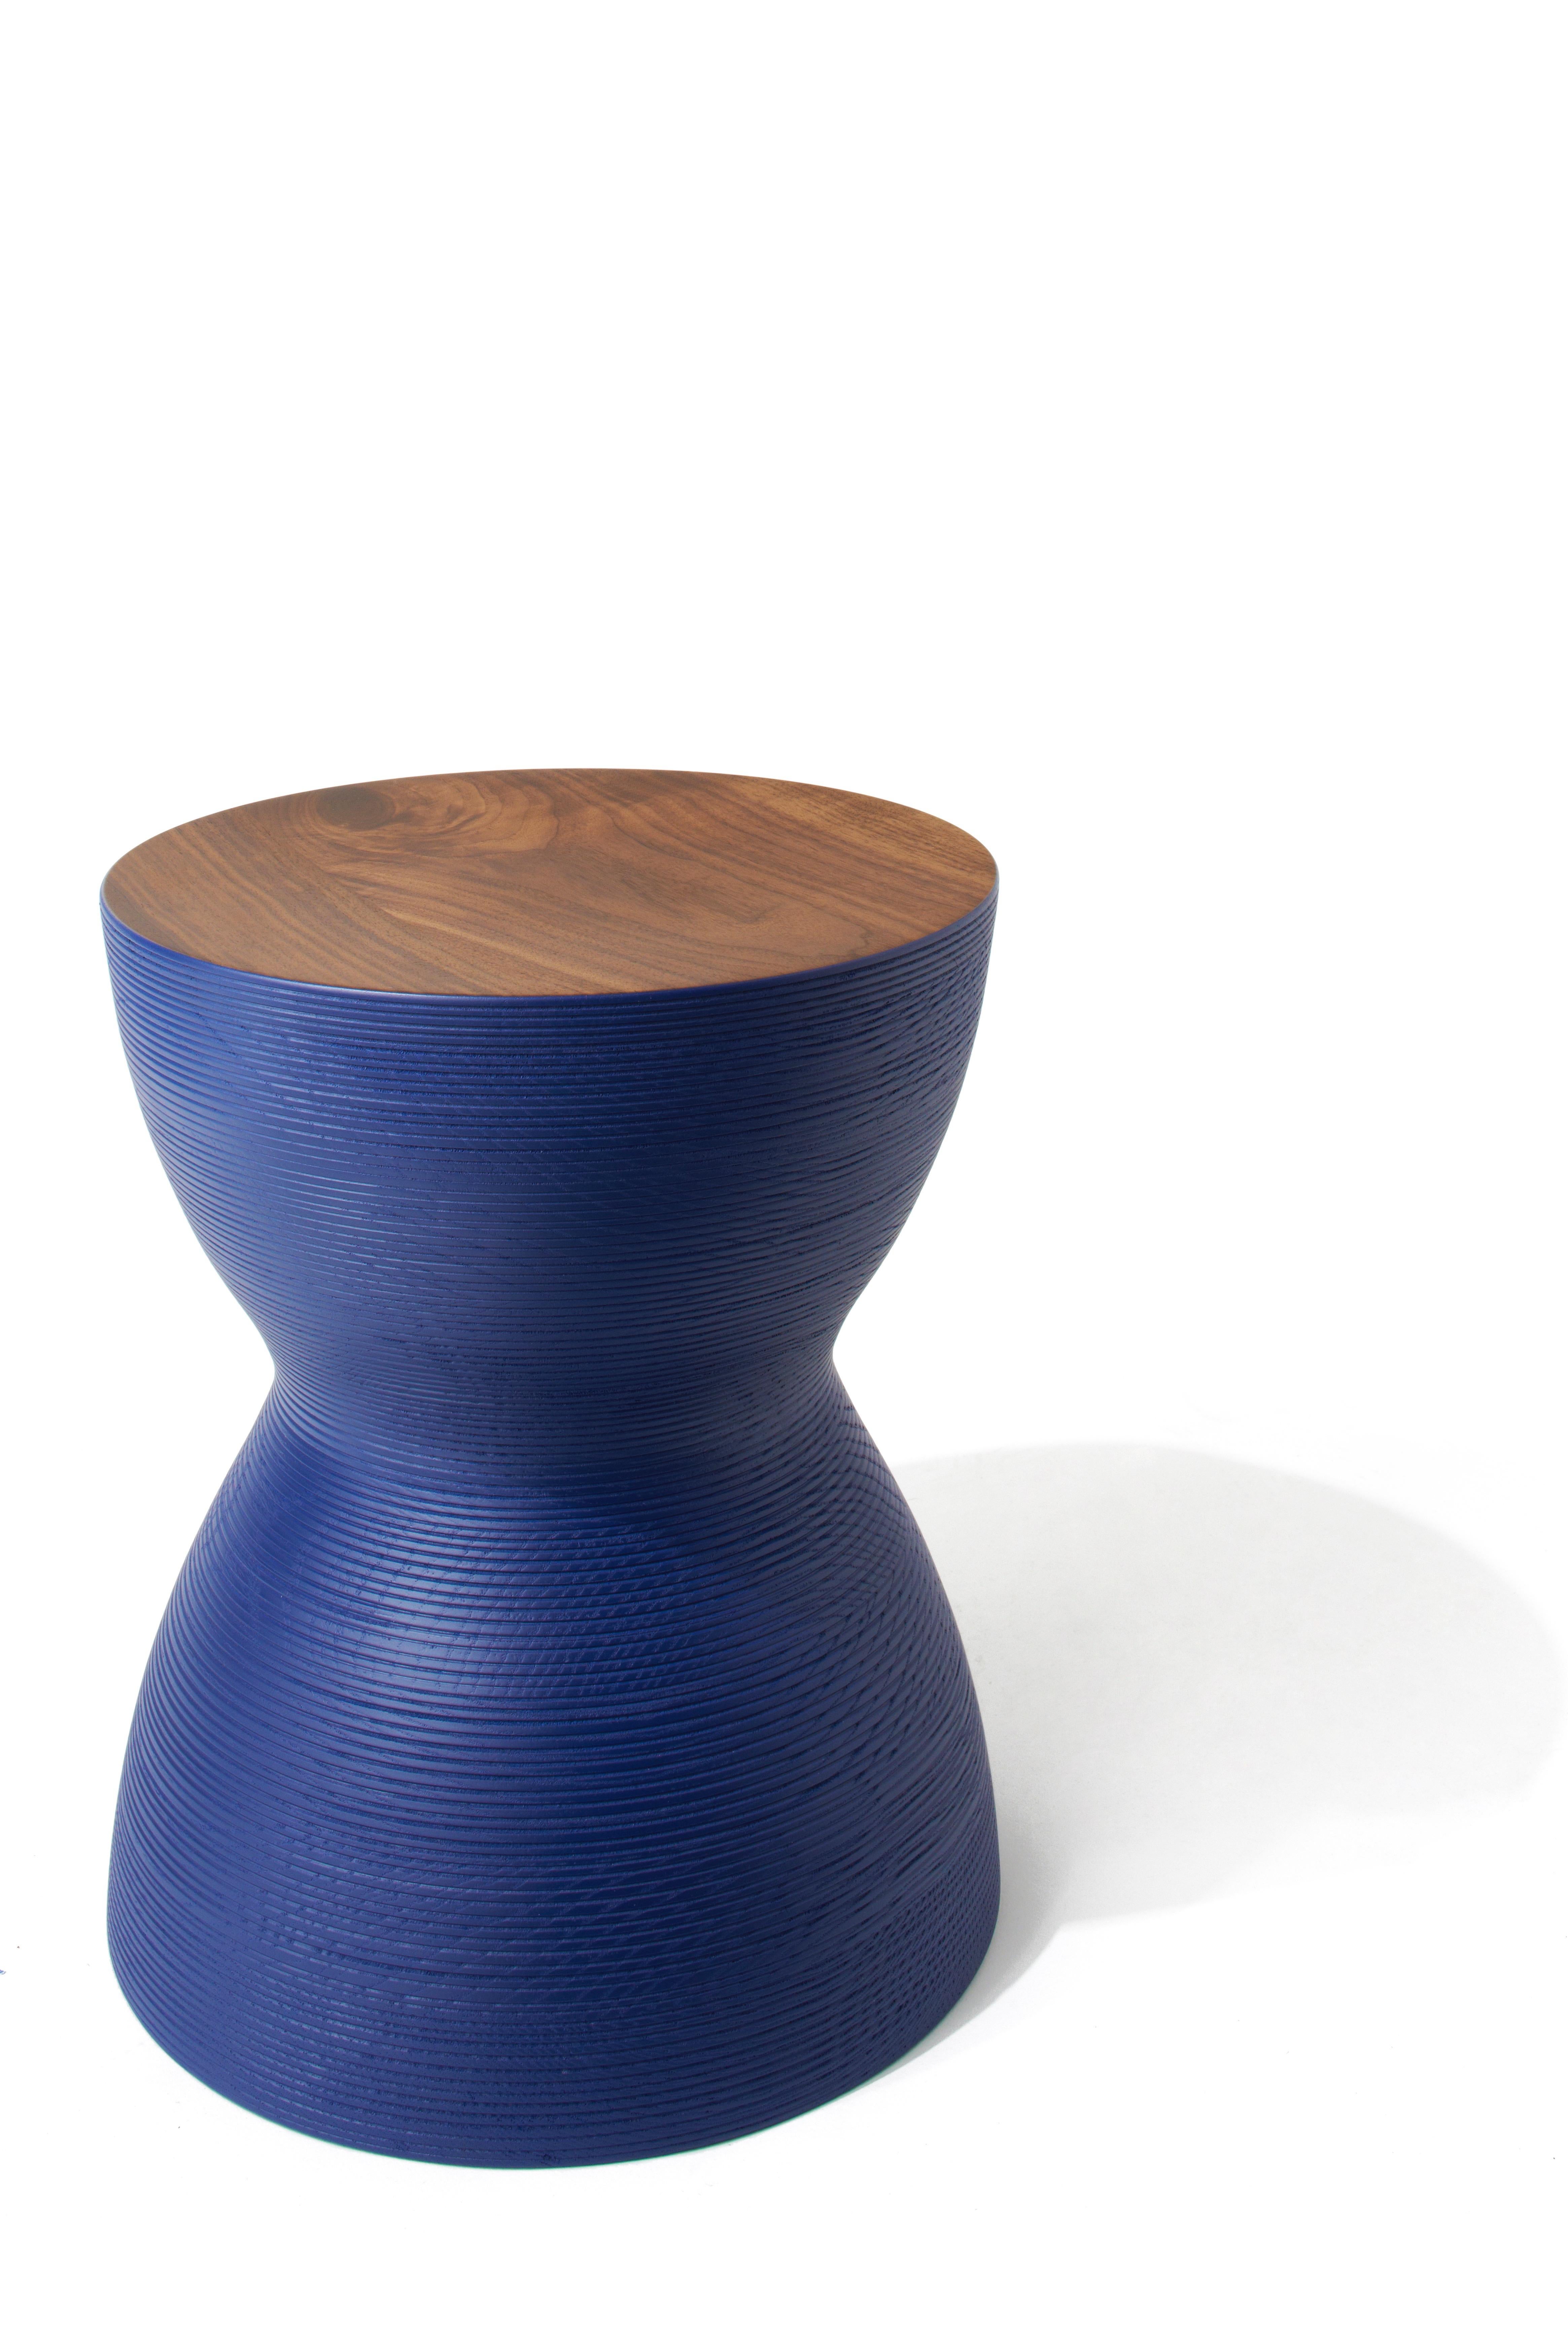 American YoYo Stool, Hand-Turned, Hardwood Side Table or Seating, in Black For Sale